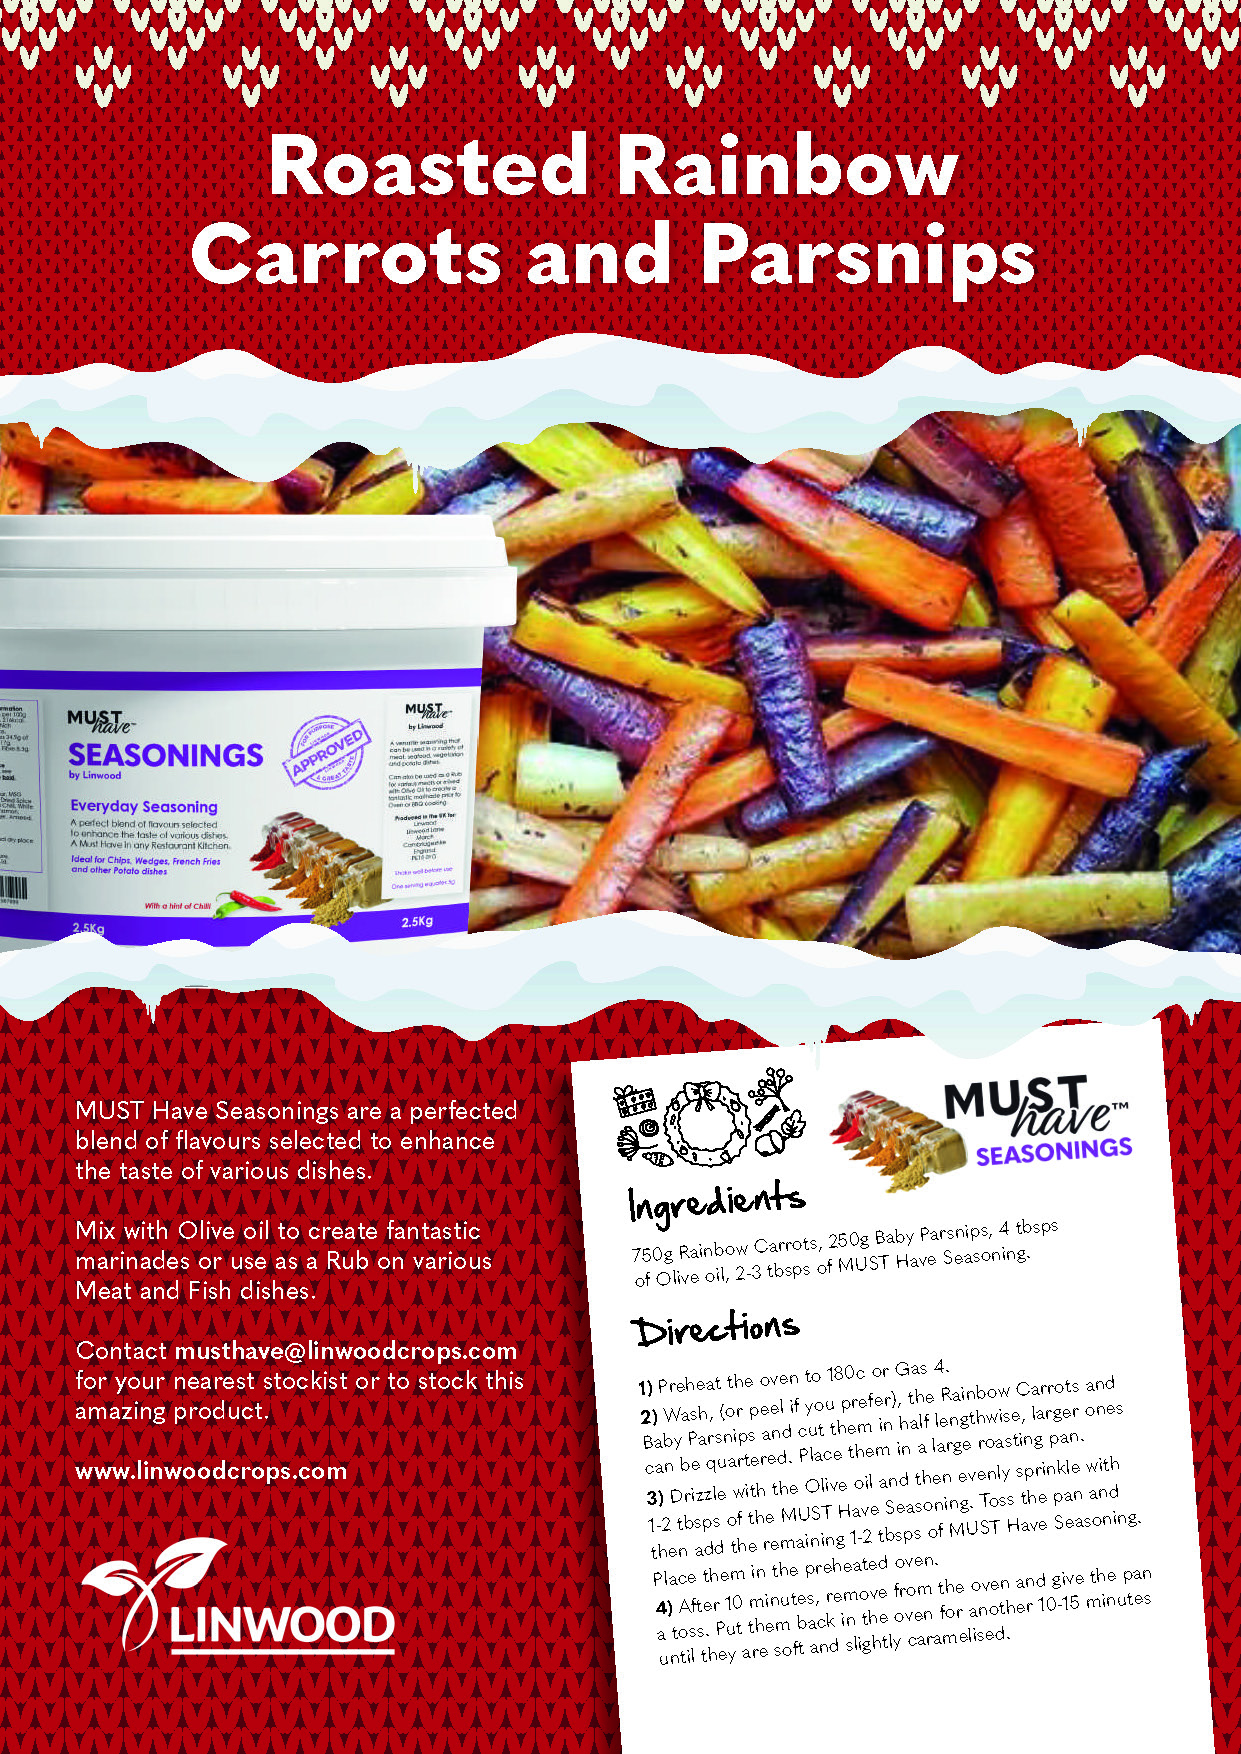 Roasted Rainbow Carrots and Parsnips